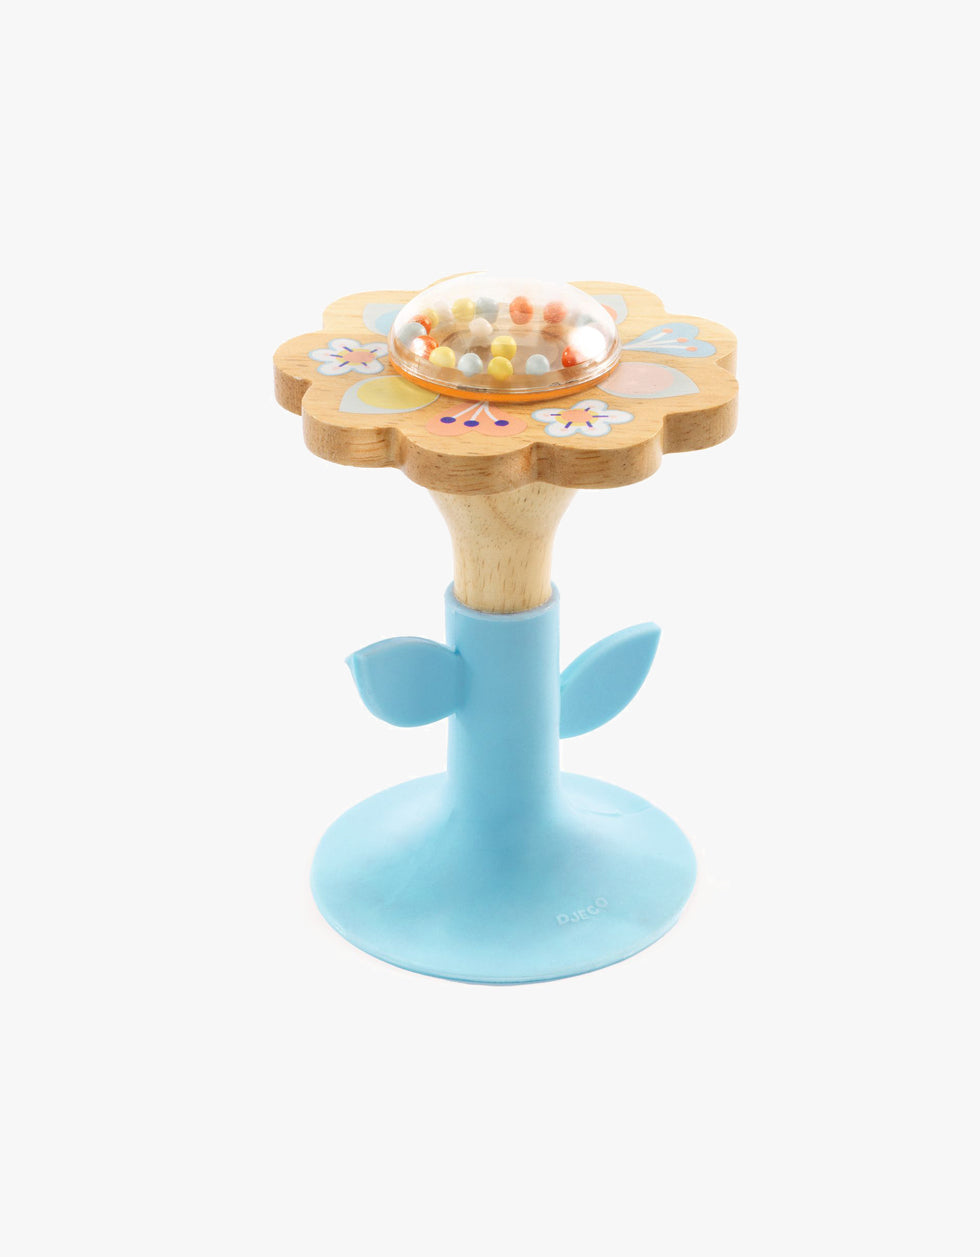 BabySwipi | Rattle with Suction Cup